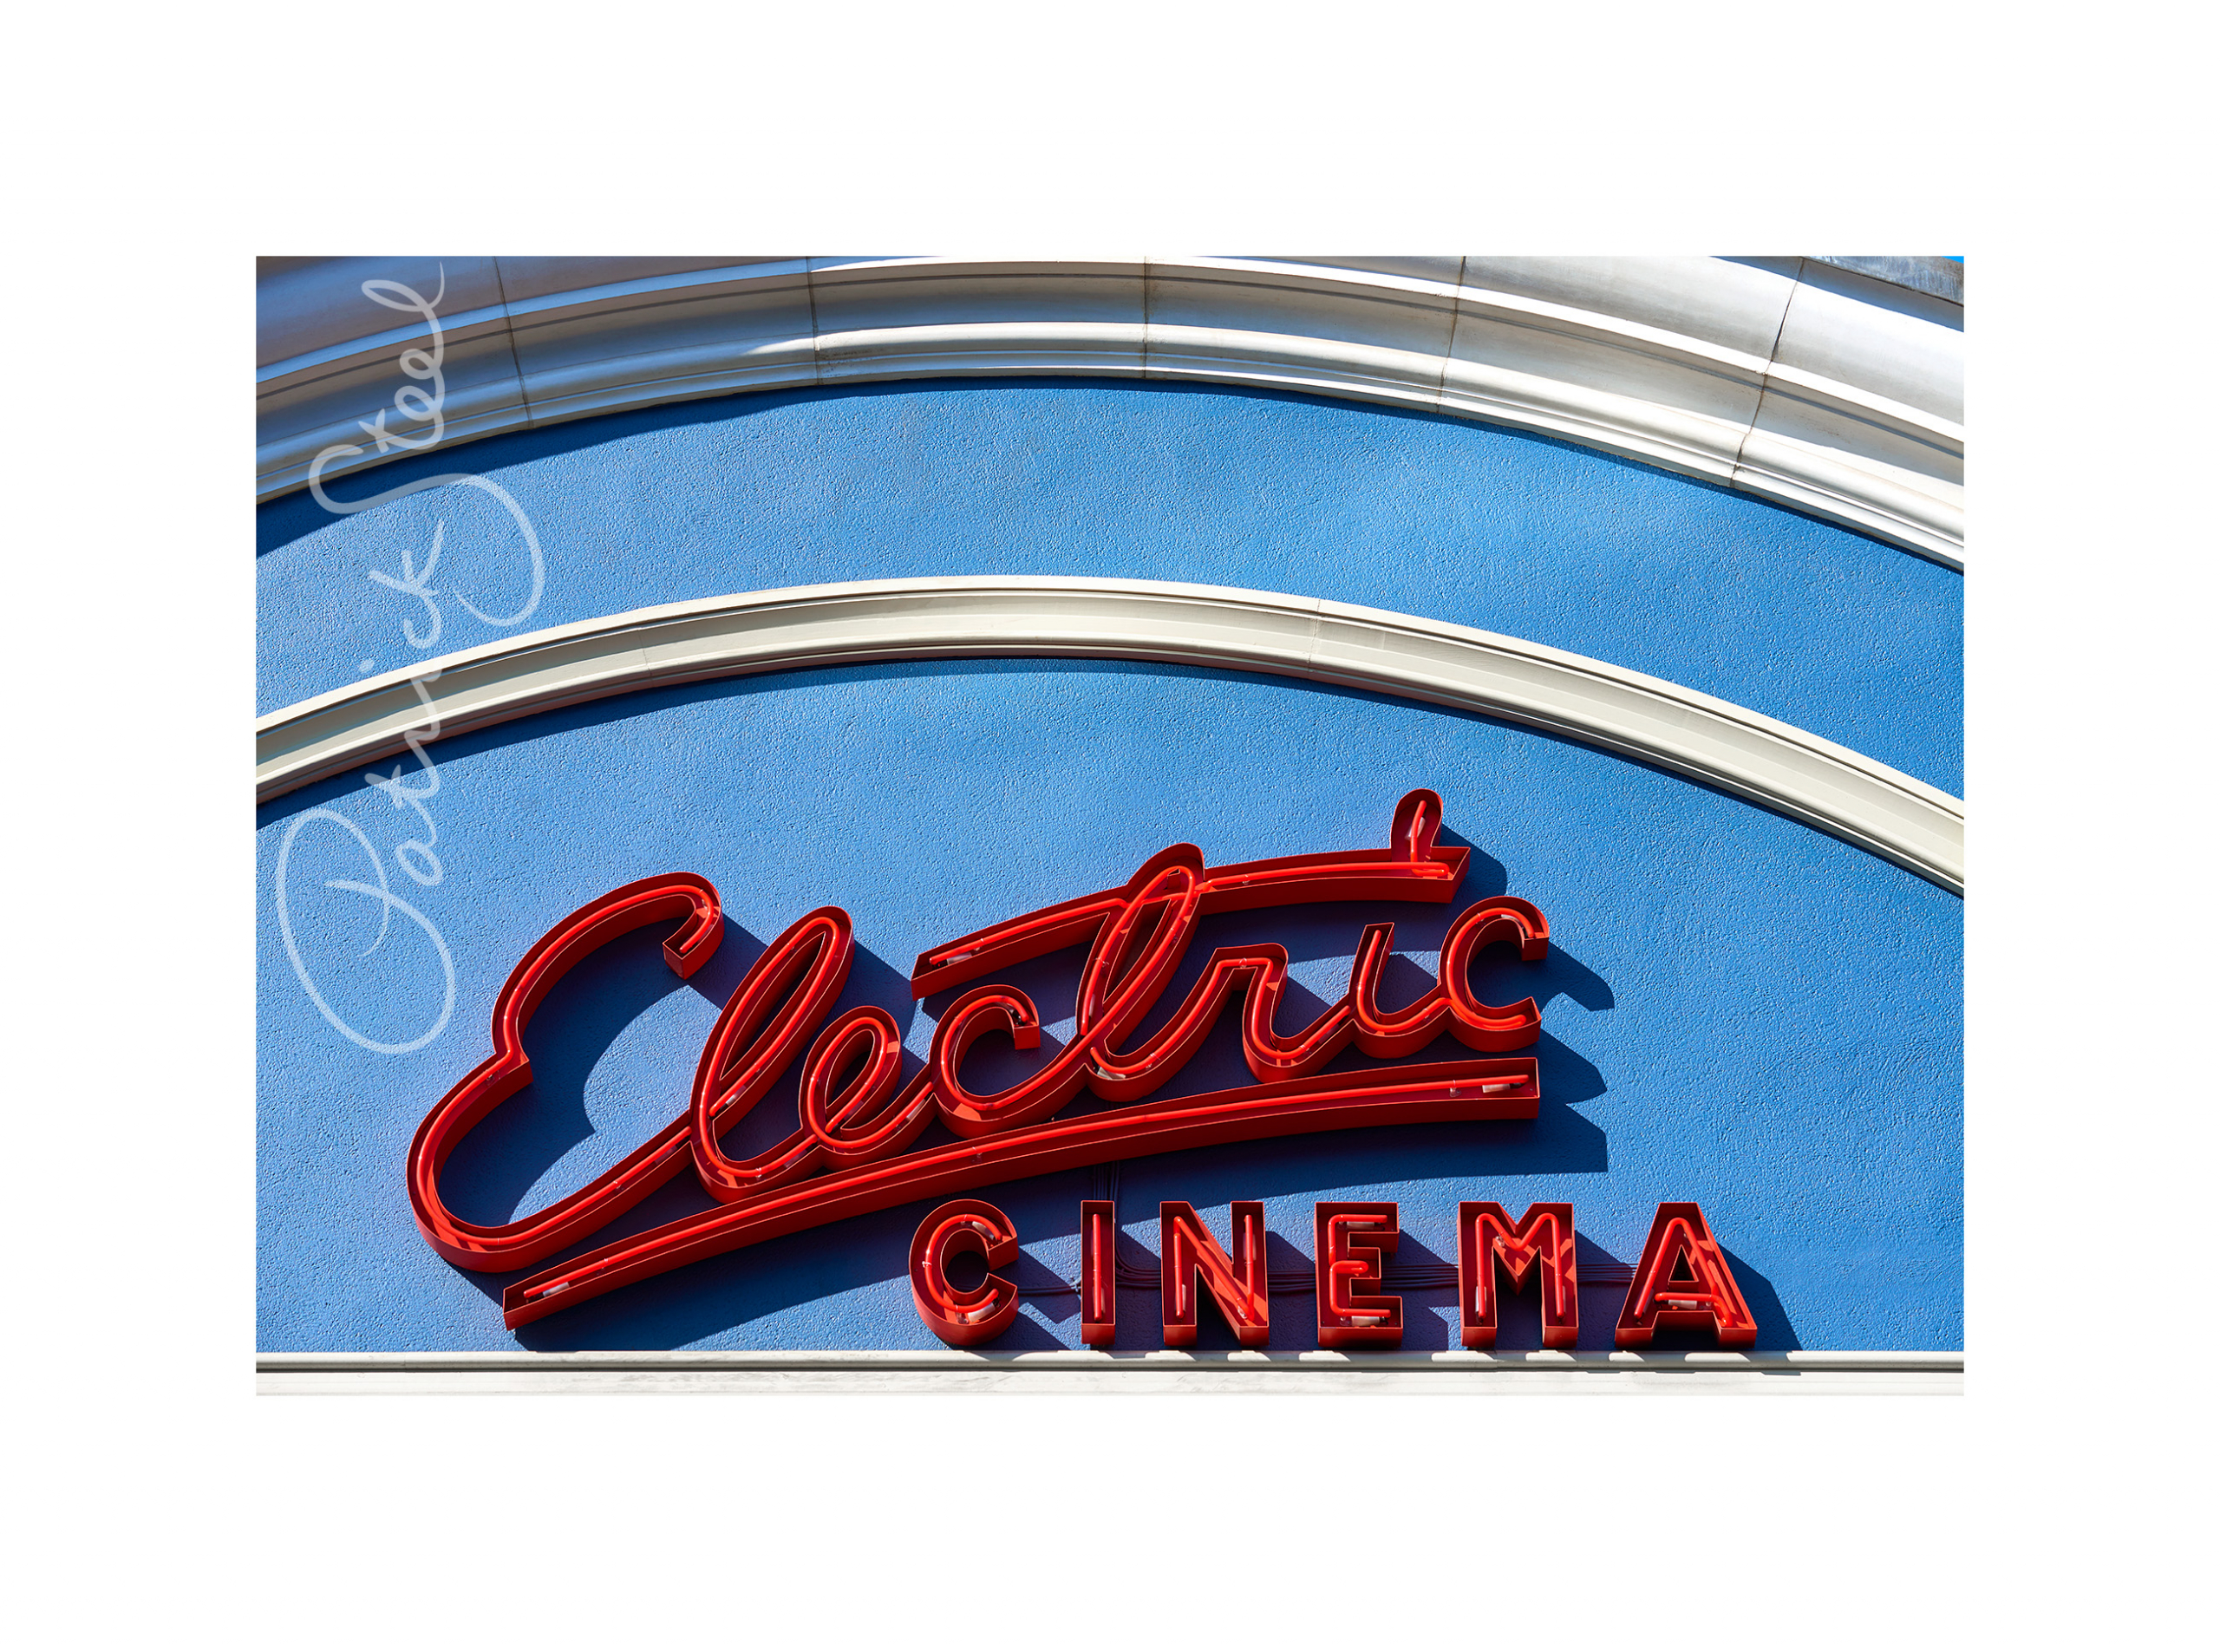 limited edition print of the electric cinema neon sign in notting hill london